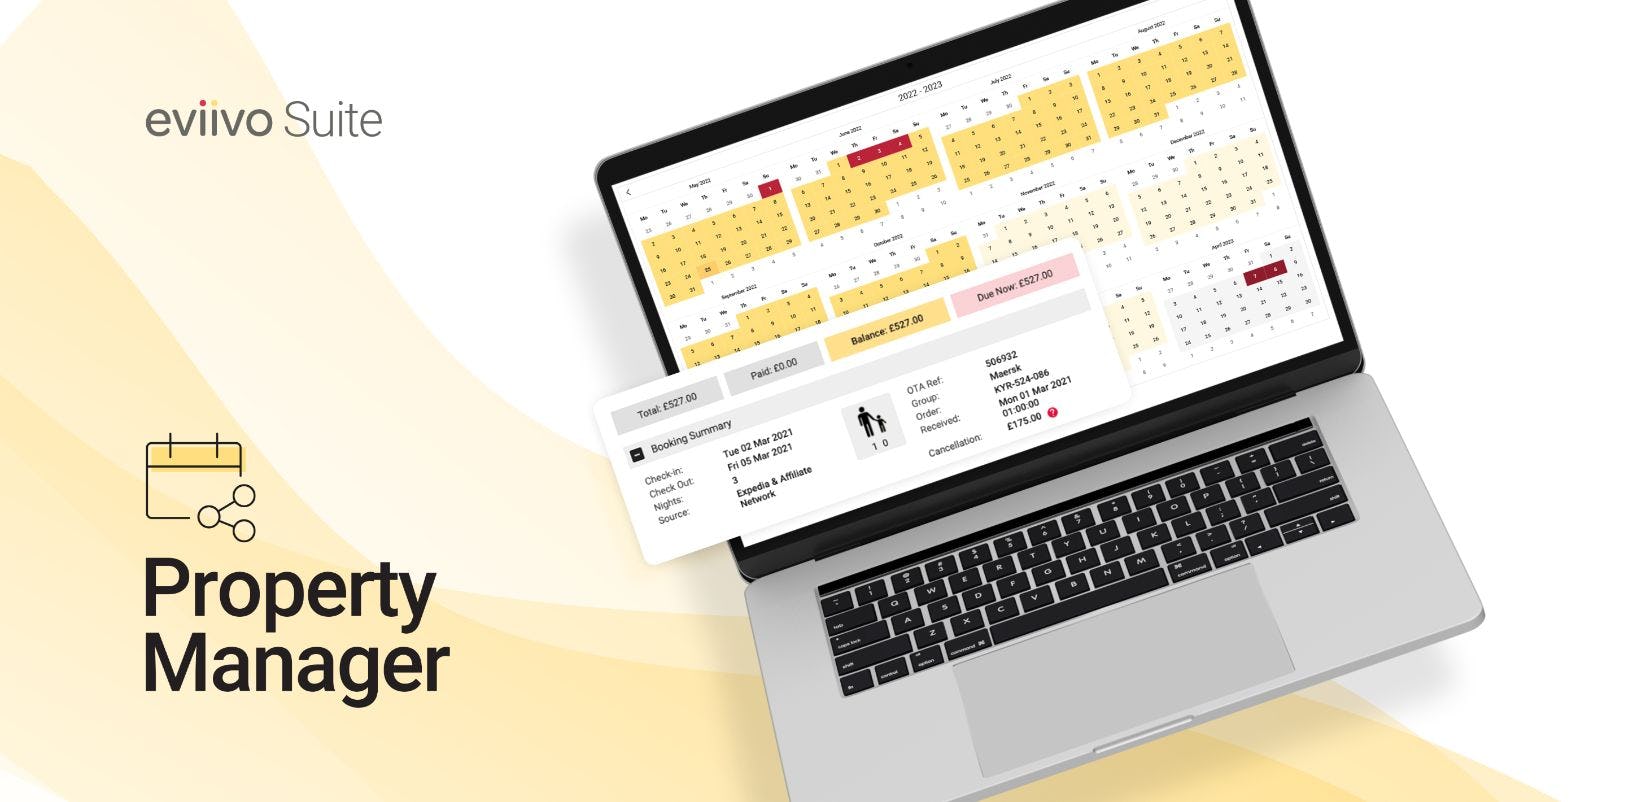 eviivo Software - Room Booking Calendar Management - Property Manager